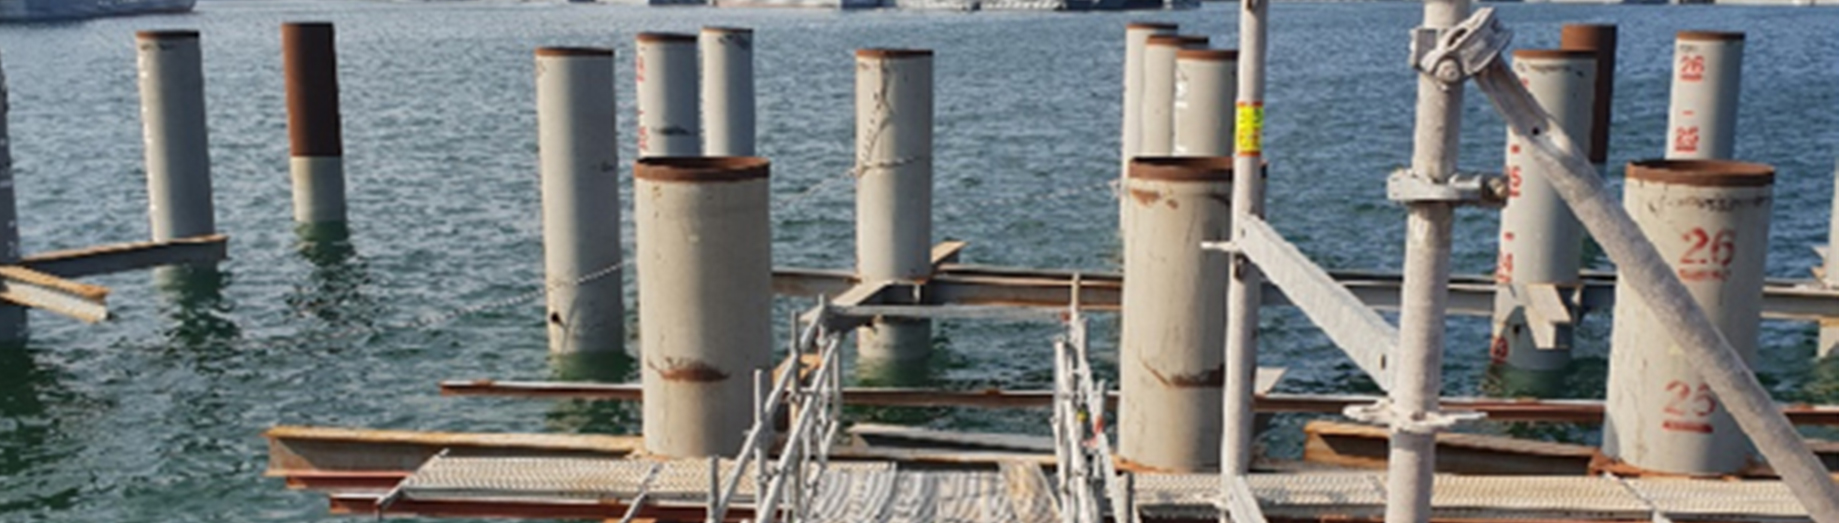 D&C of Breakwater and Cargo Pier Repairs at Kuwait Naval Base